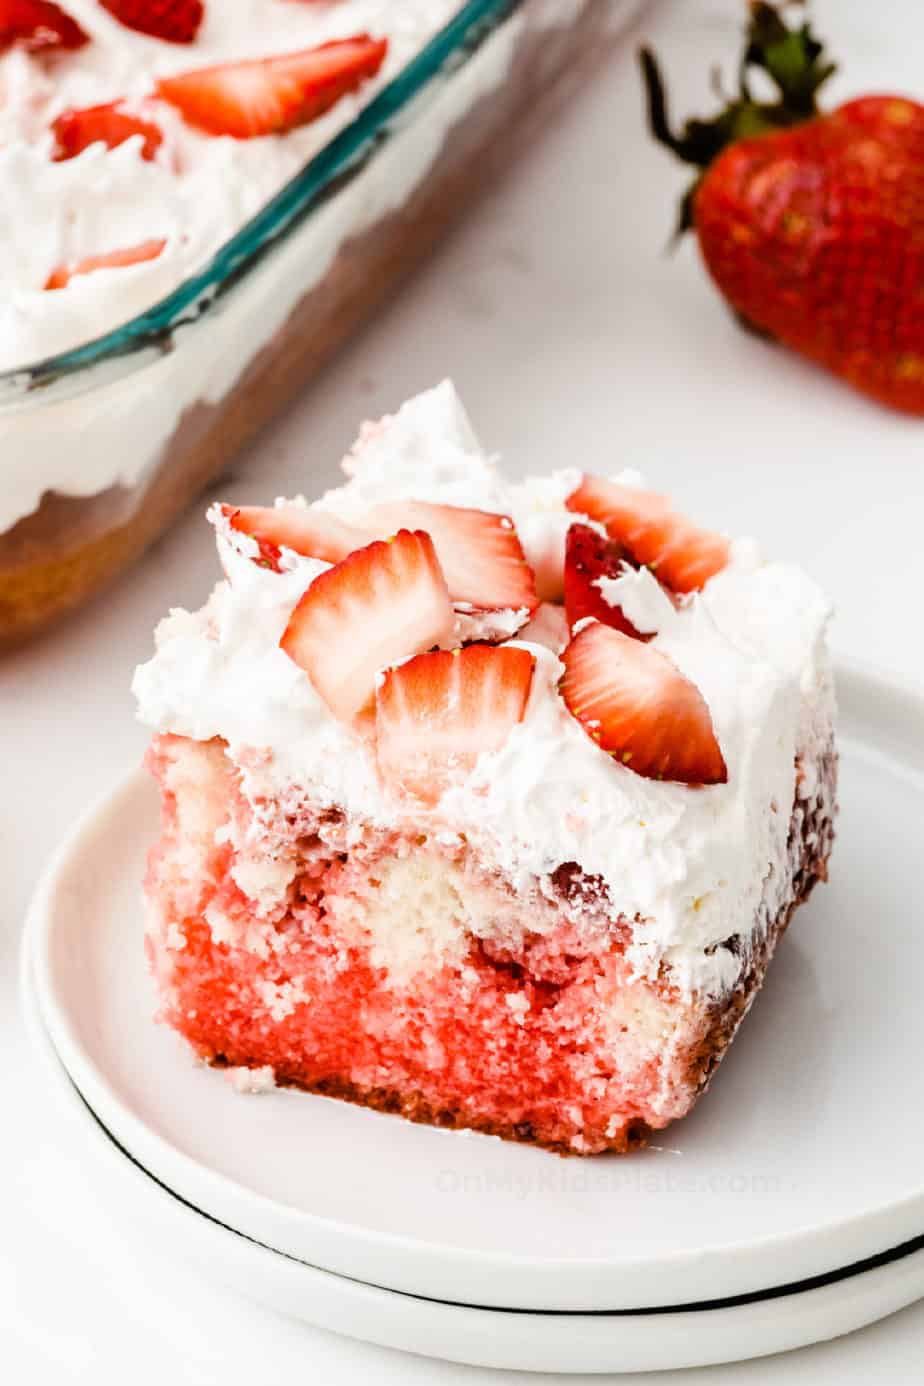 A slice of red and white cake topped with strawberries on a plate next to a pan full of cake.